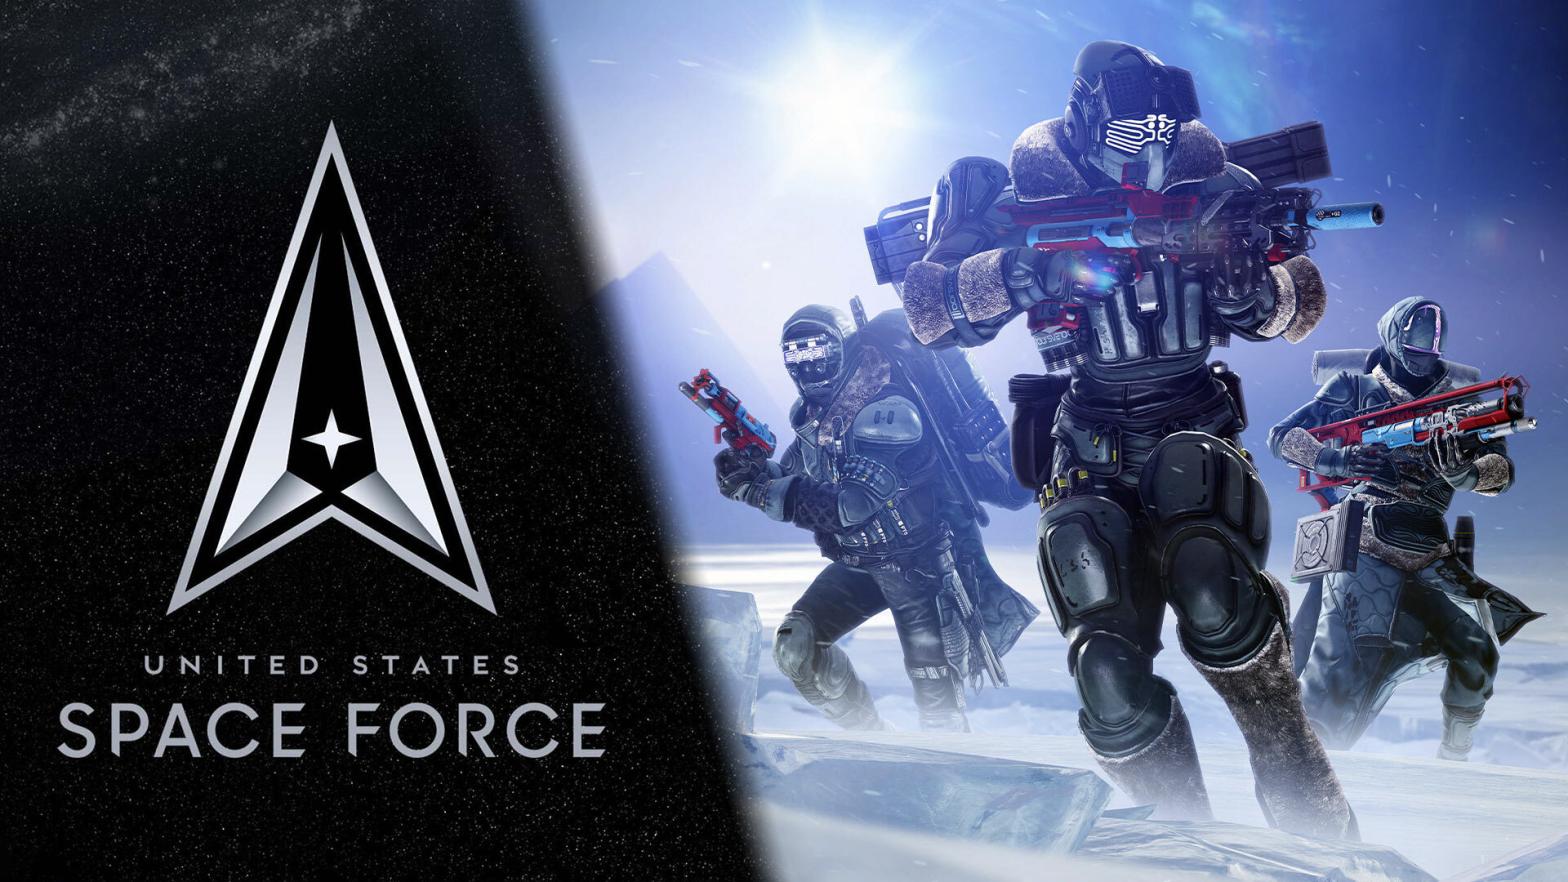 Image: Space Force,Image: Bungie